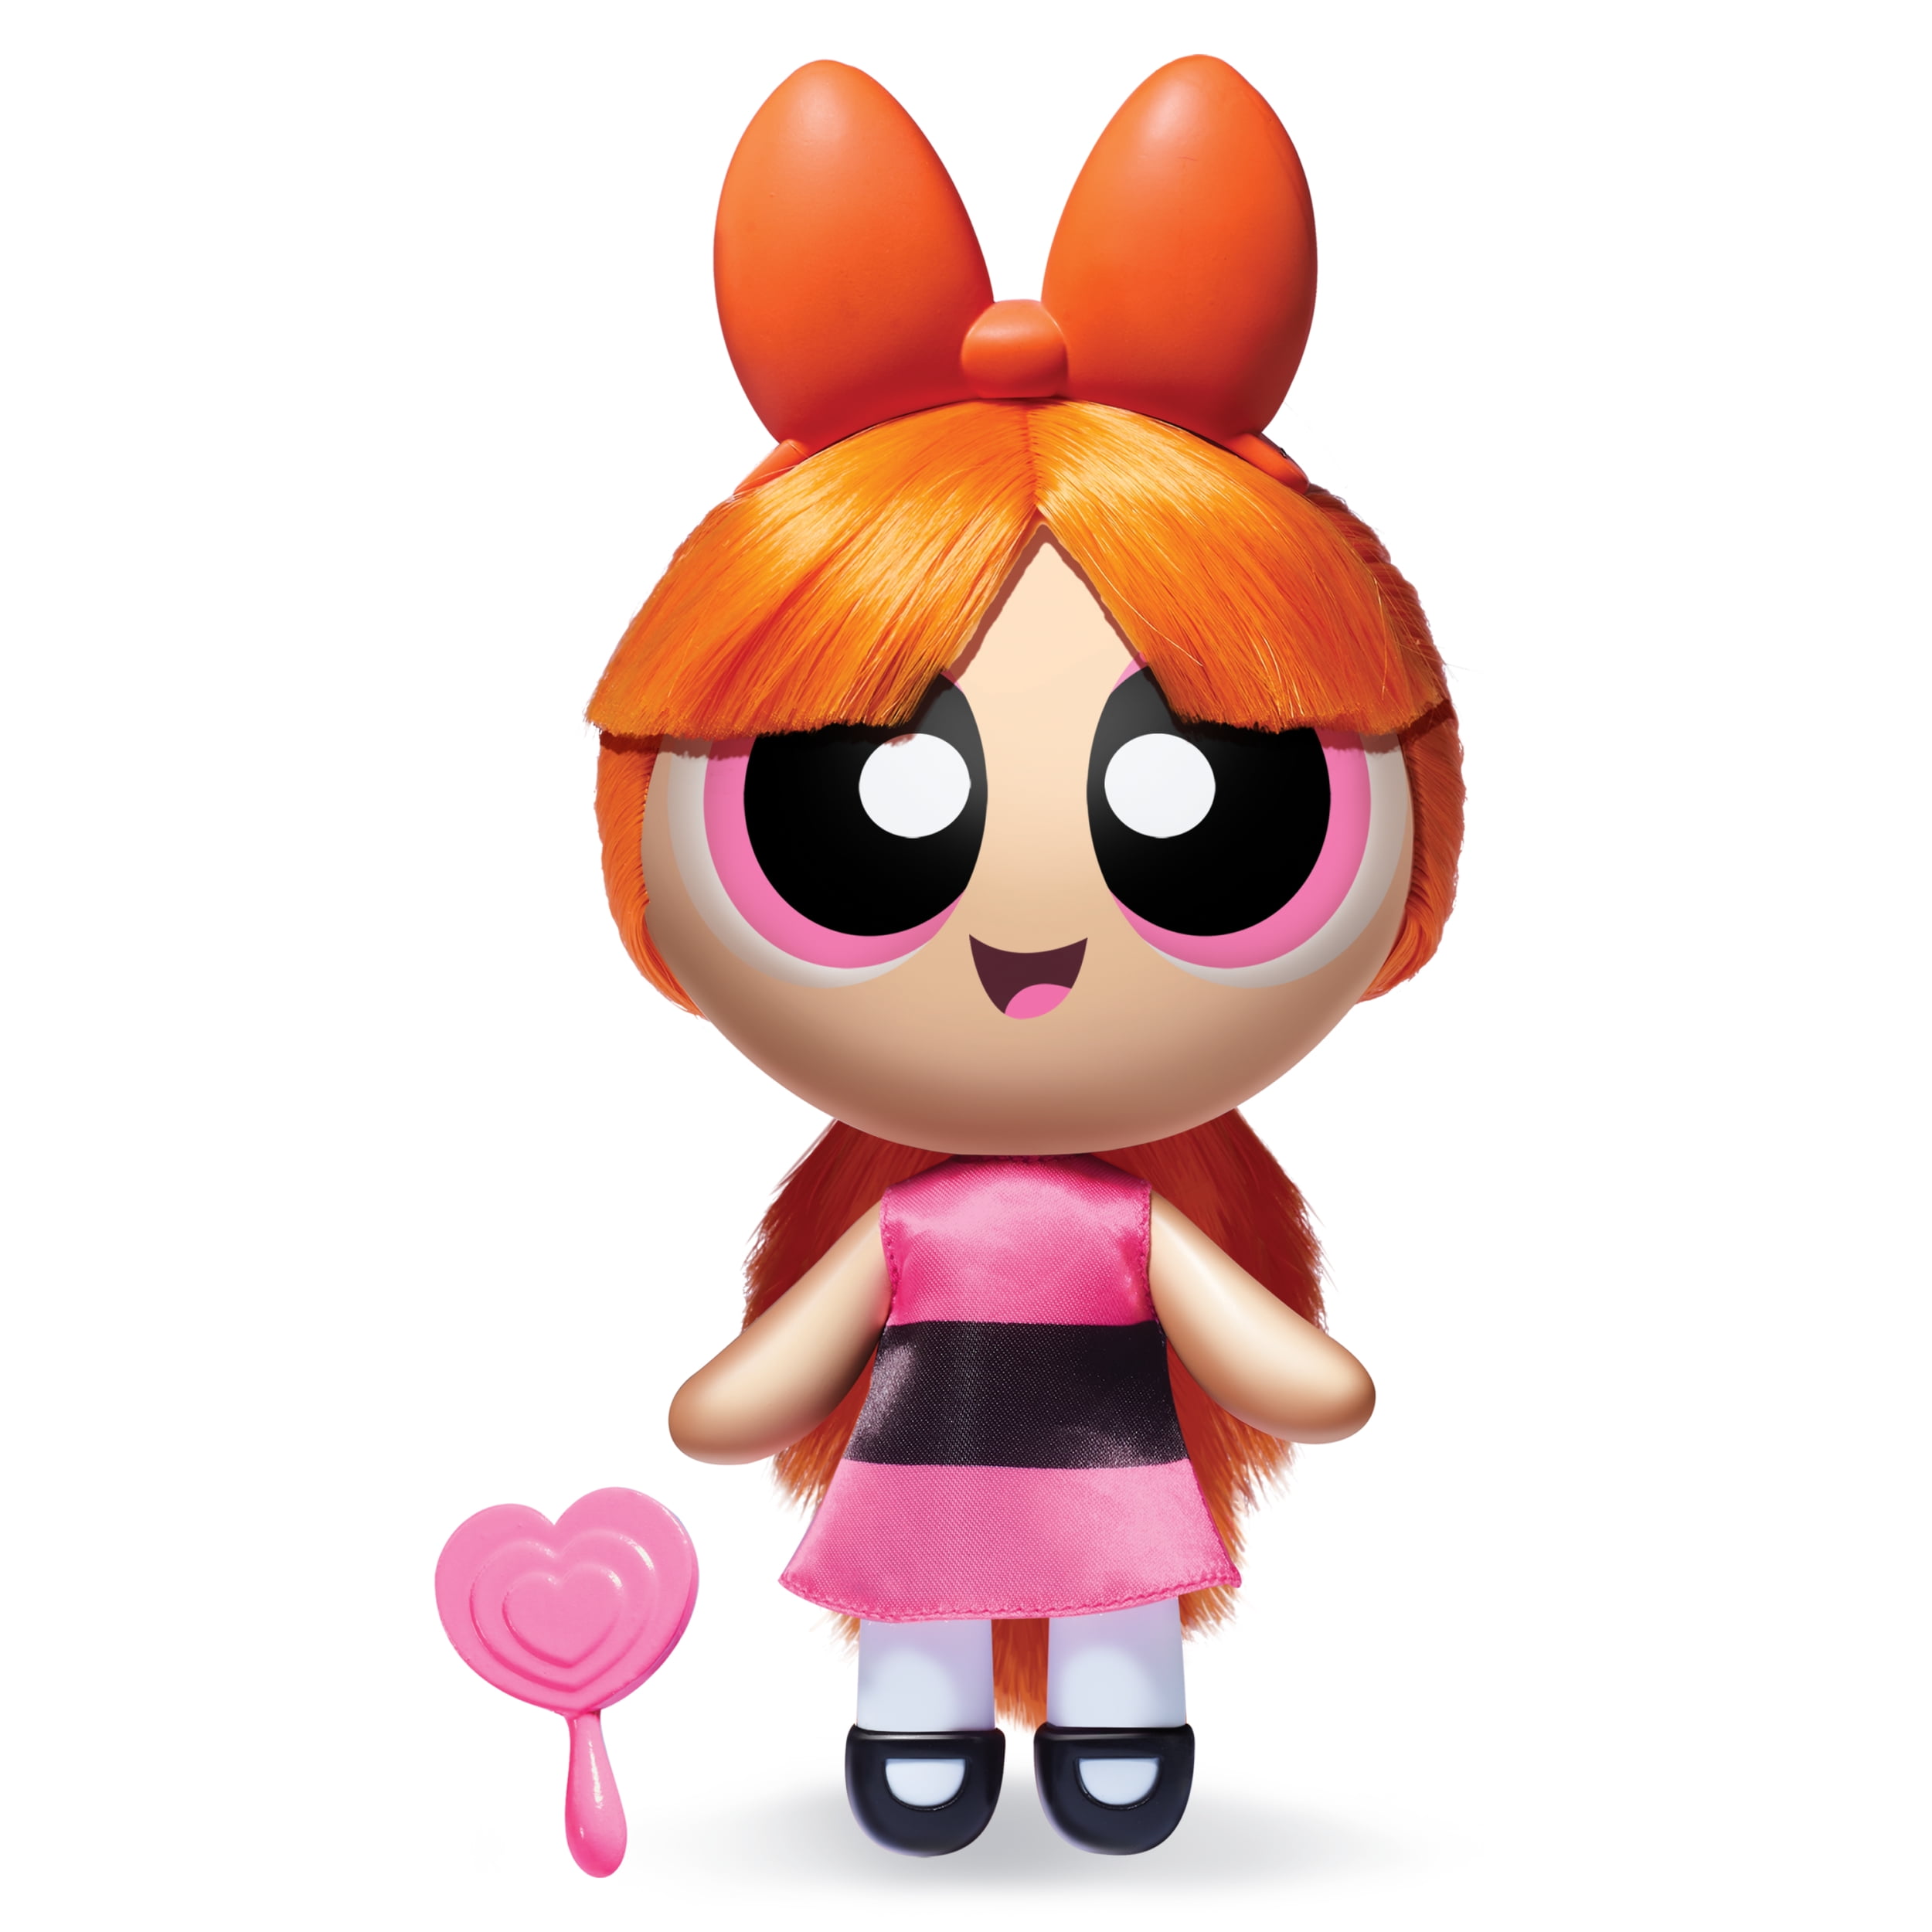 Powerpuff Girls Dress Up  Play Now Online for Free 